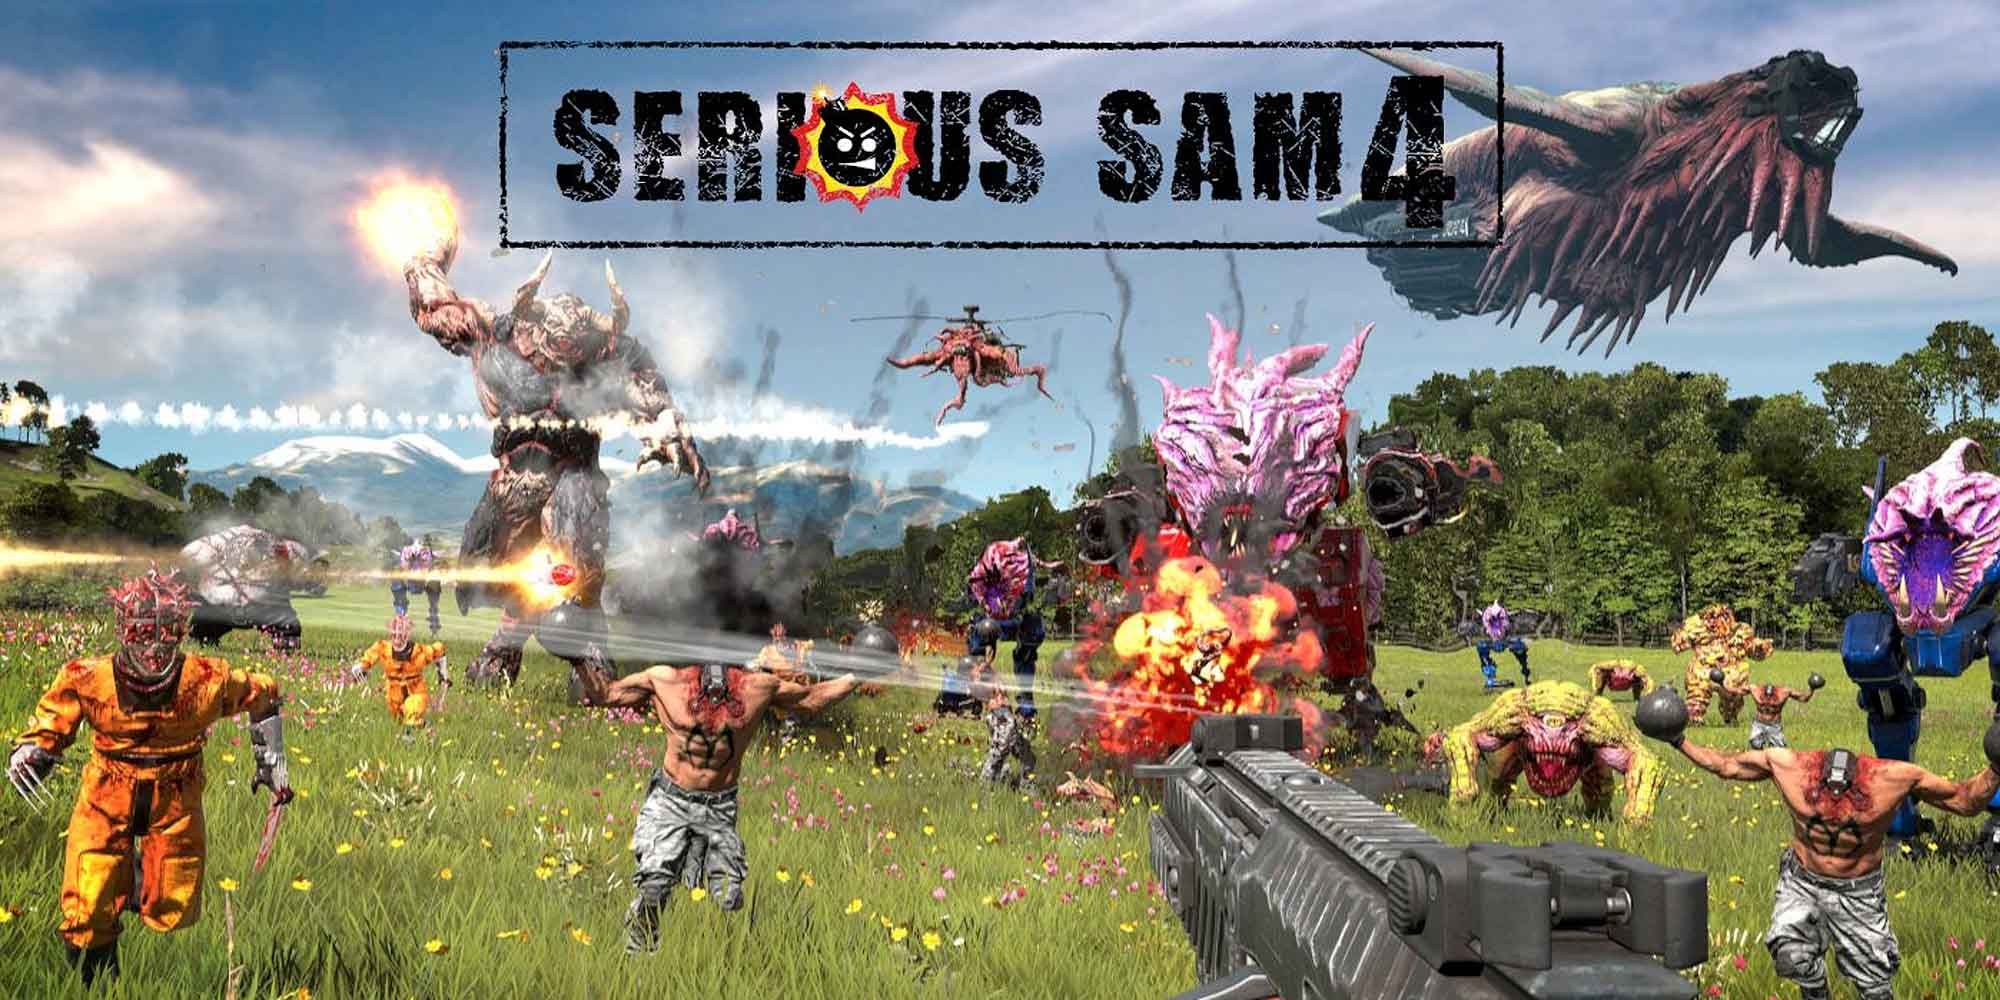 Promotional Image of Serious Sam 4 showing the various creatures the player fights